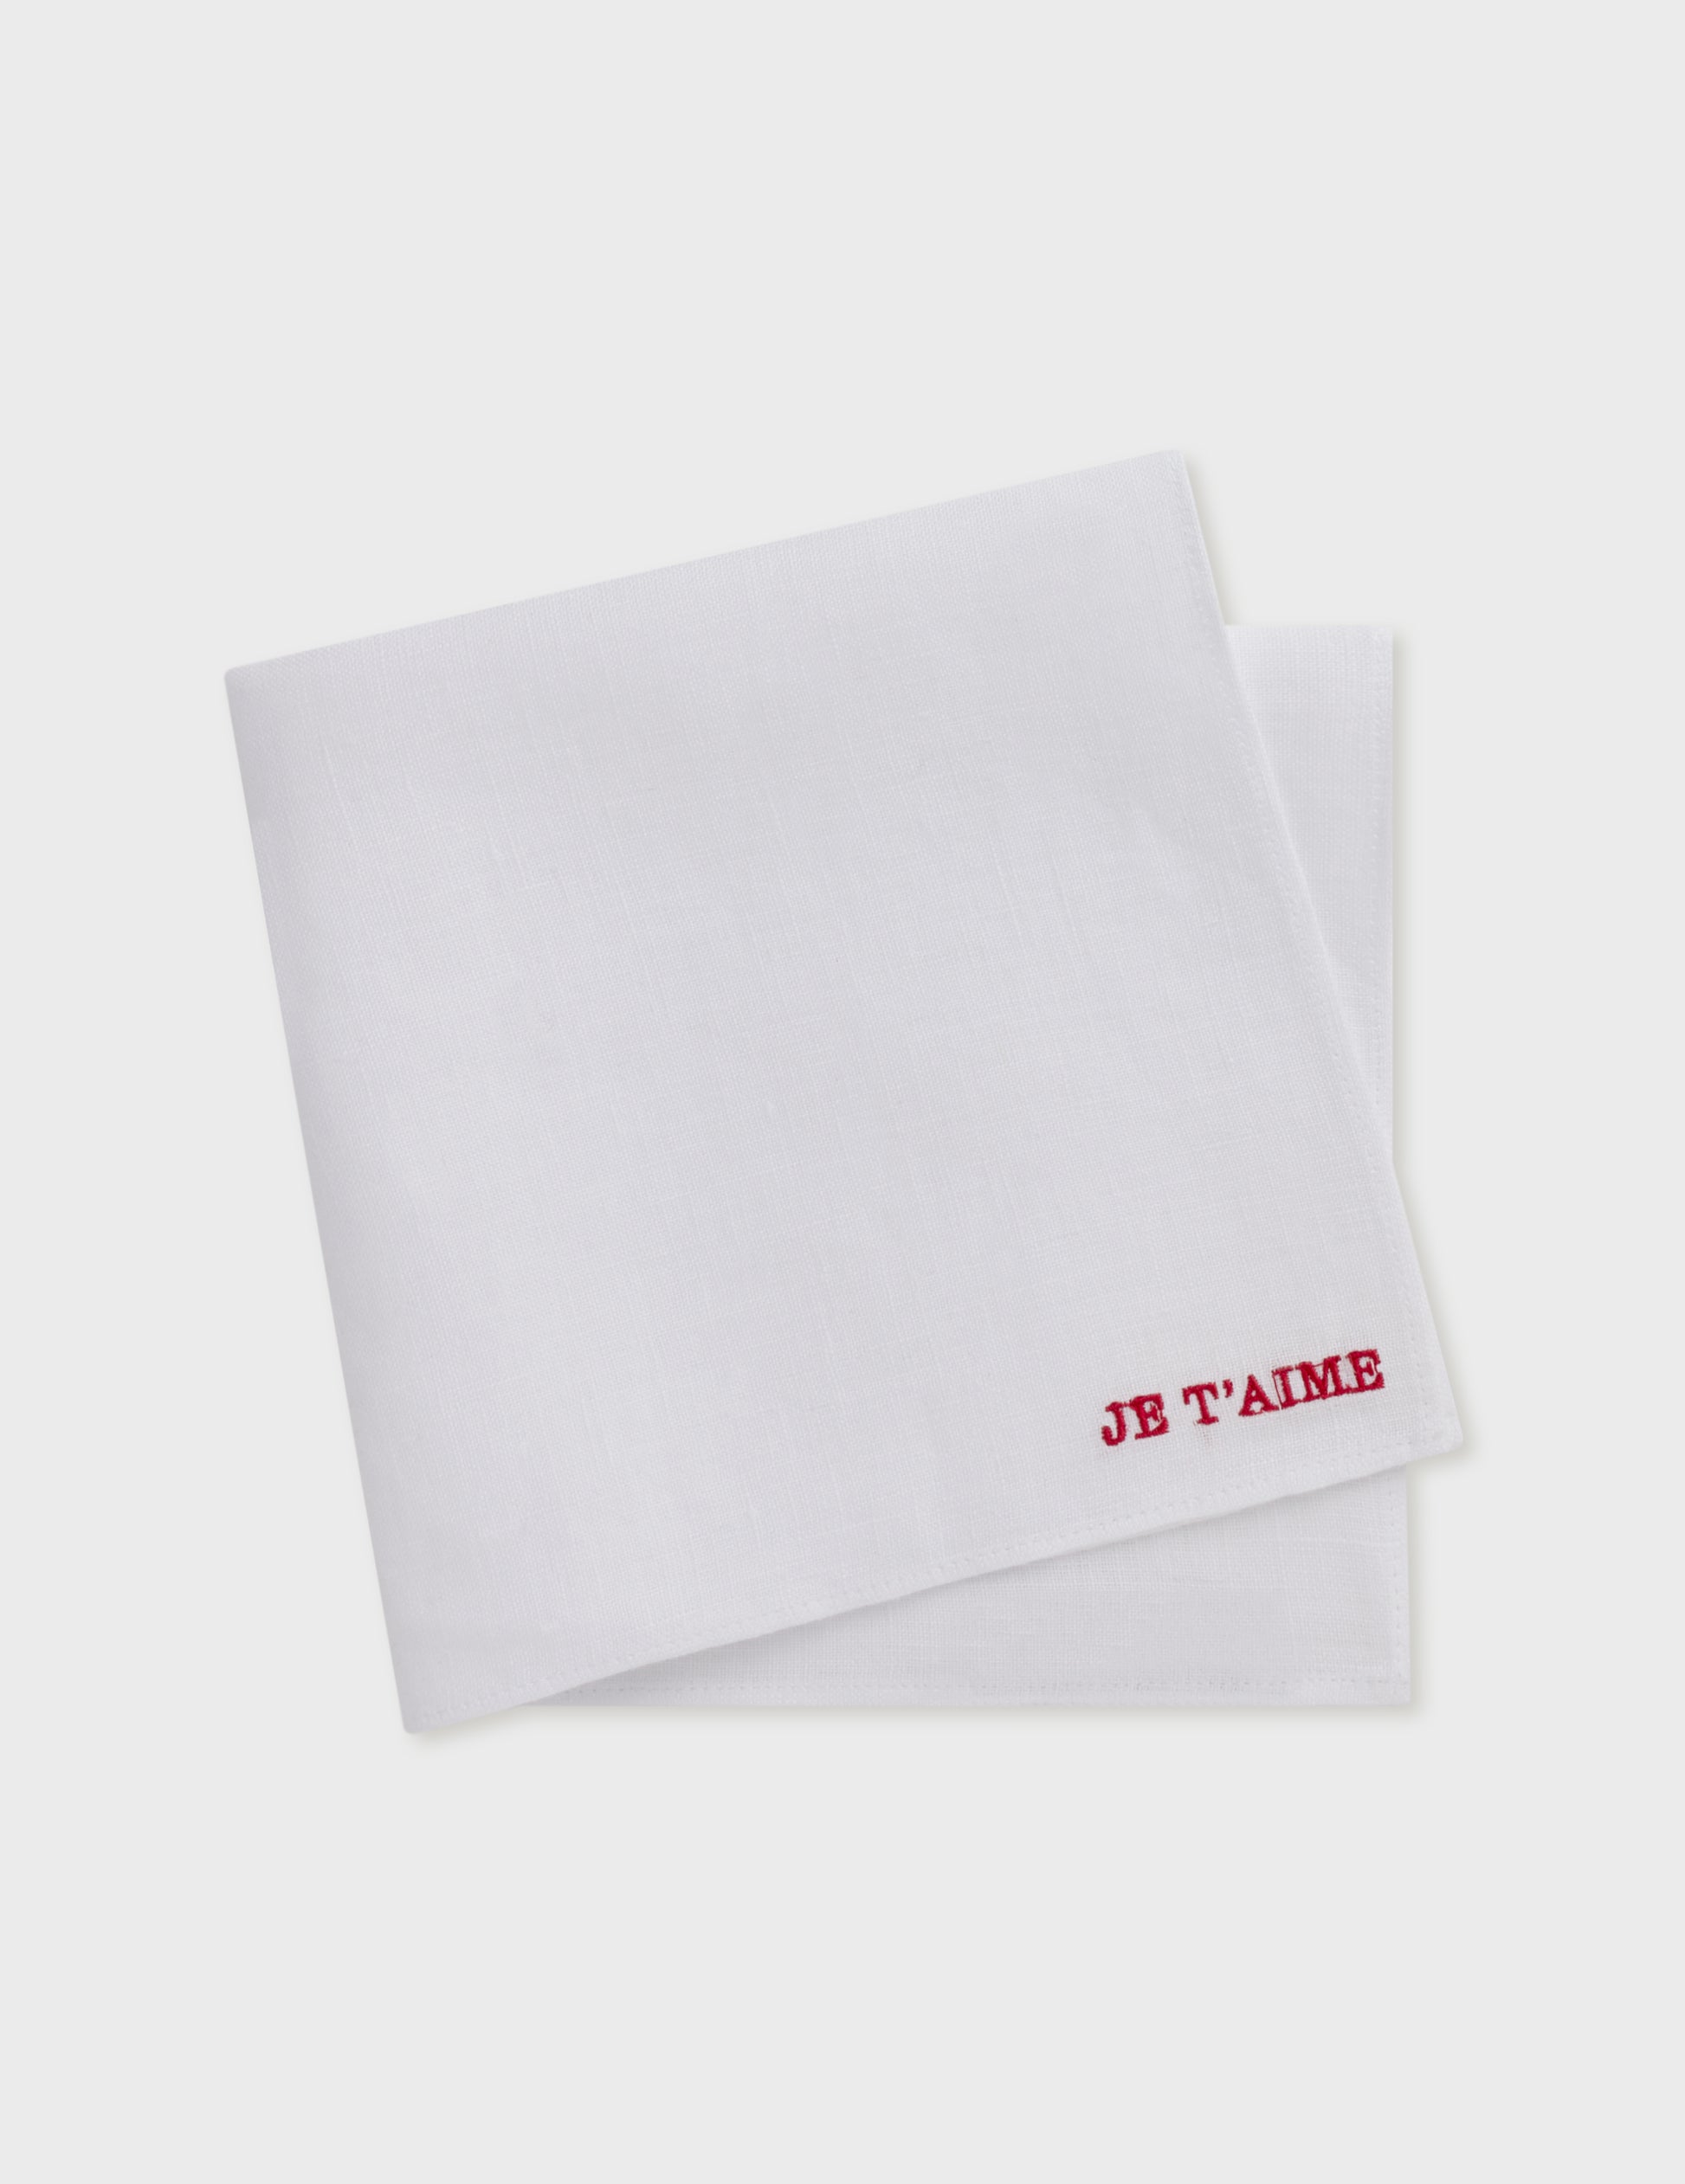 "JE T'AIME" WHITE EMBROIDERED RED POCKET SQUARE